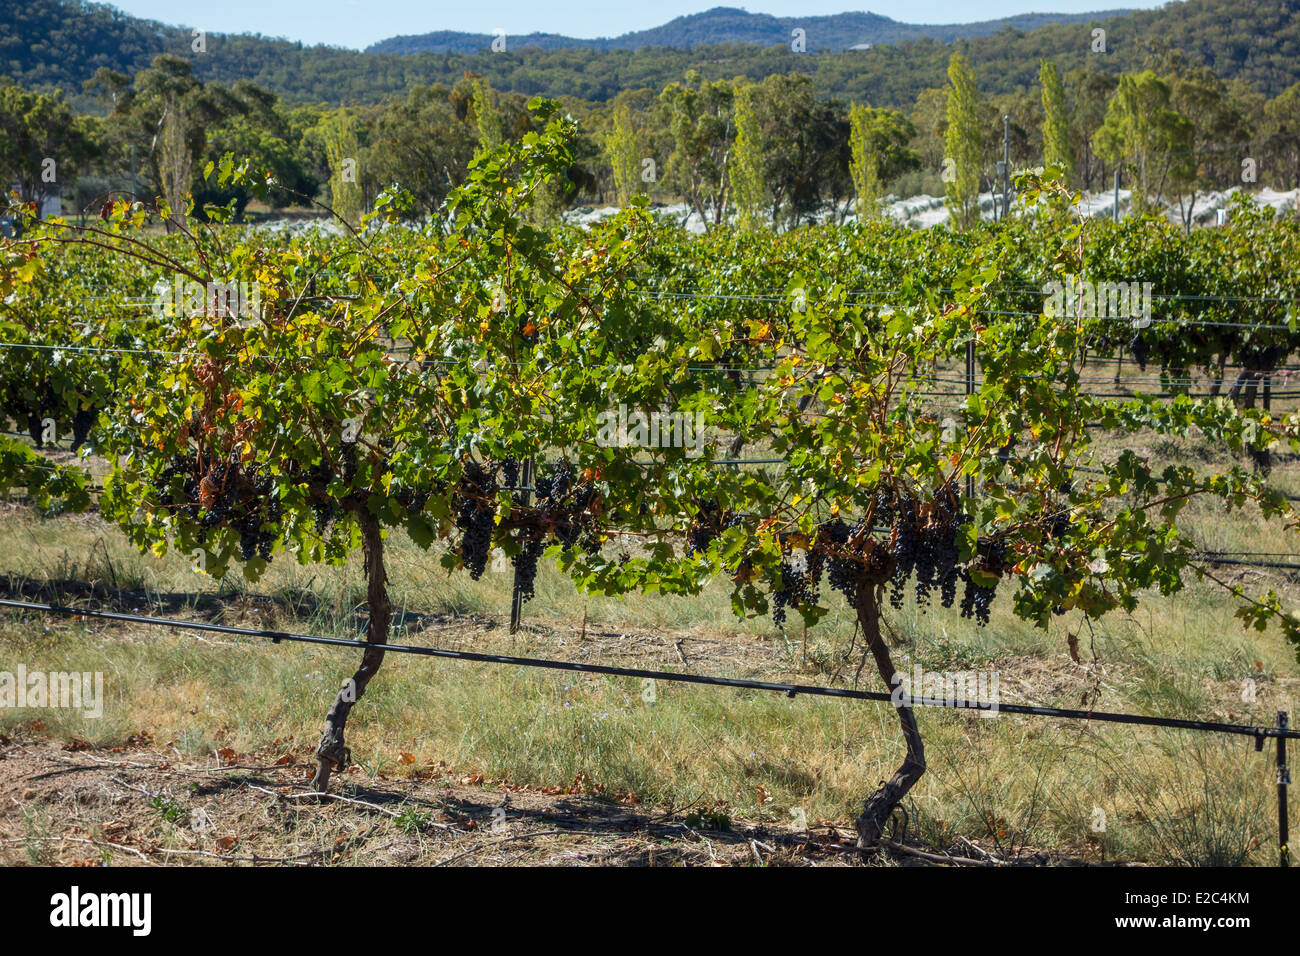 Grapes ready for harvesting in the wine region of Stanthorpe, Queensland, Australia Stock Photo